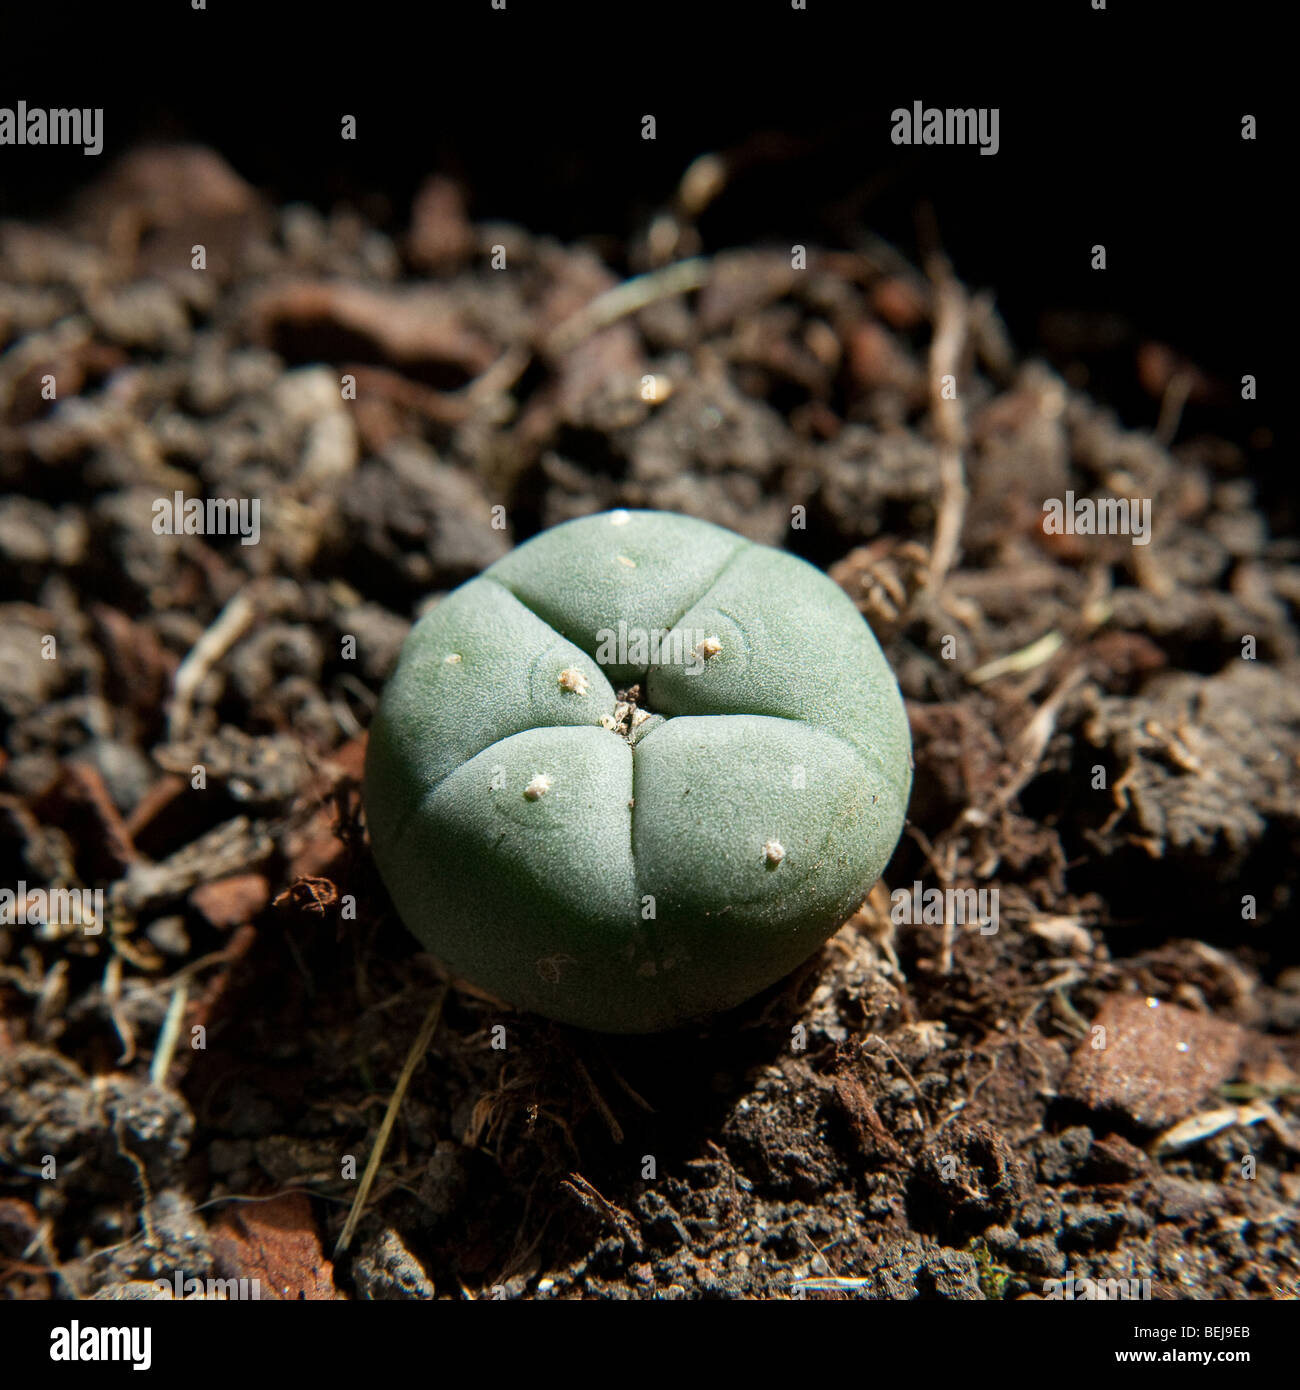 Peyote cactus Lophophora williamsii, or Mescal button. used as a hallucinogen by the Native Americans and recreational drug user Stock Photo